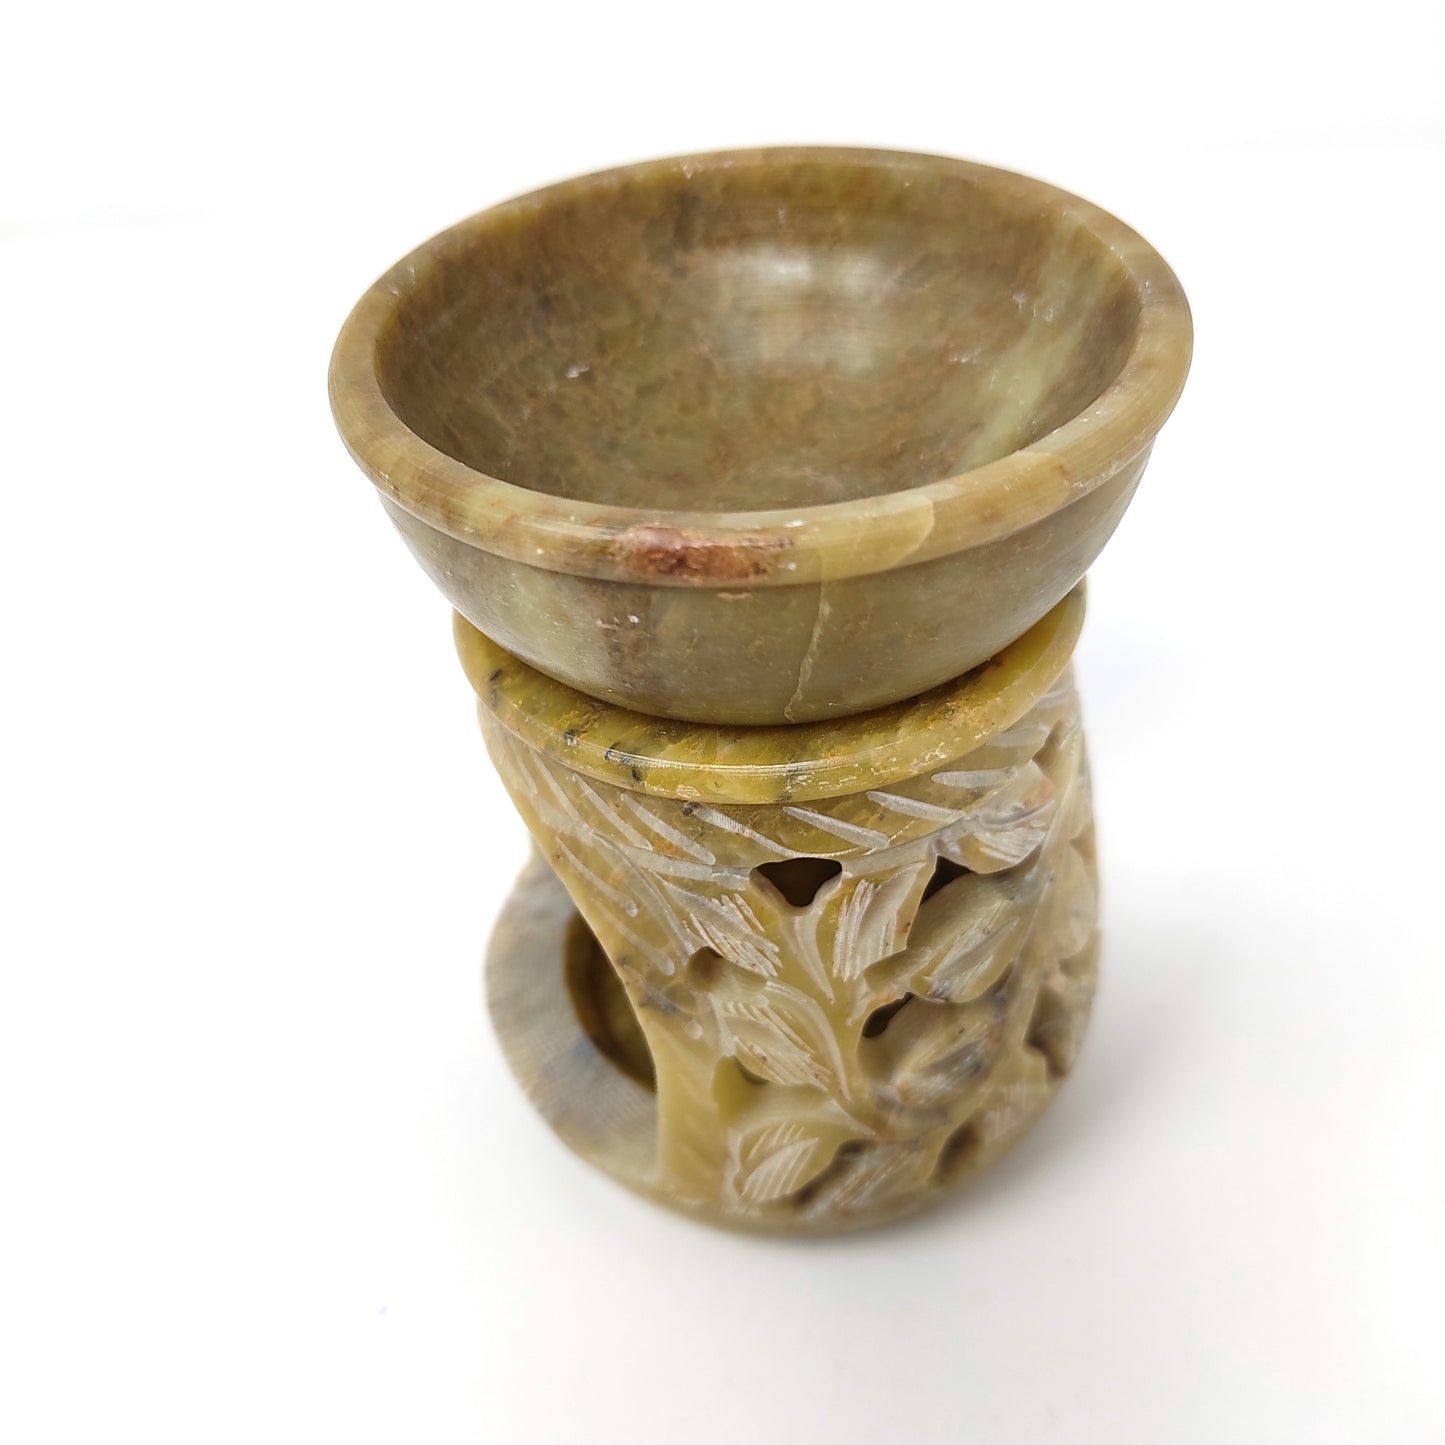 Green Soapstone Oil Diffuser Oil Burner Candle Holder Hand-carved India 3.5" Tall